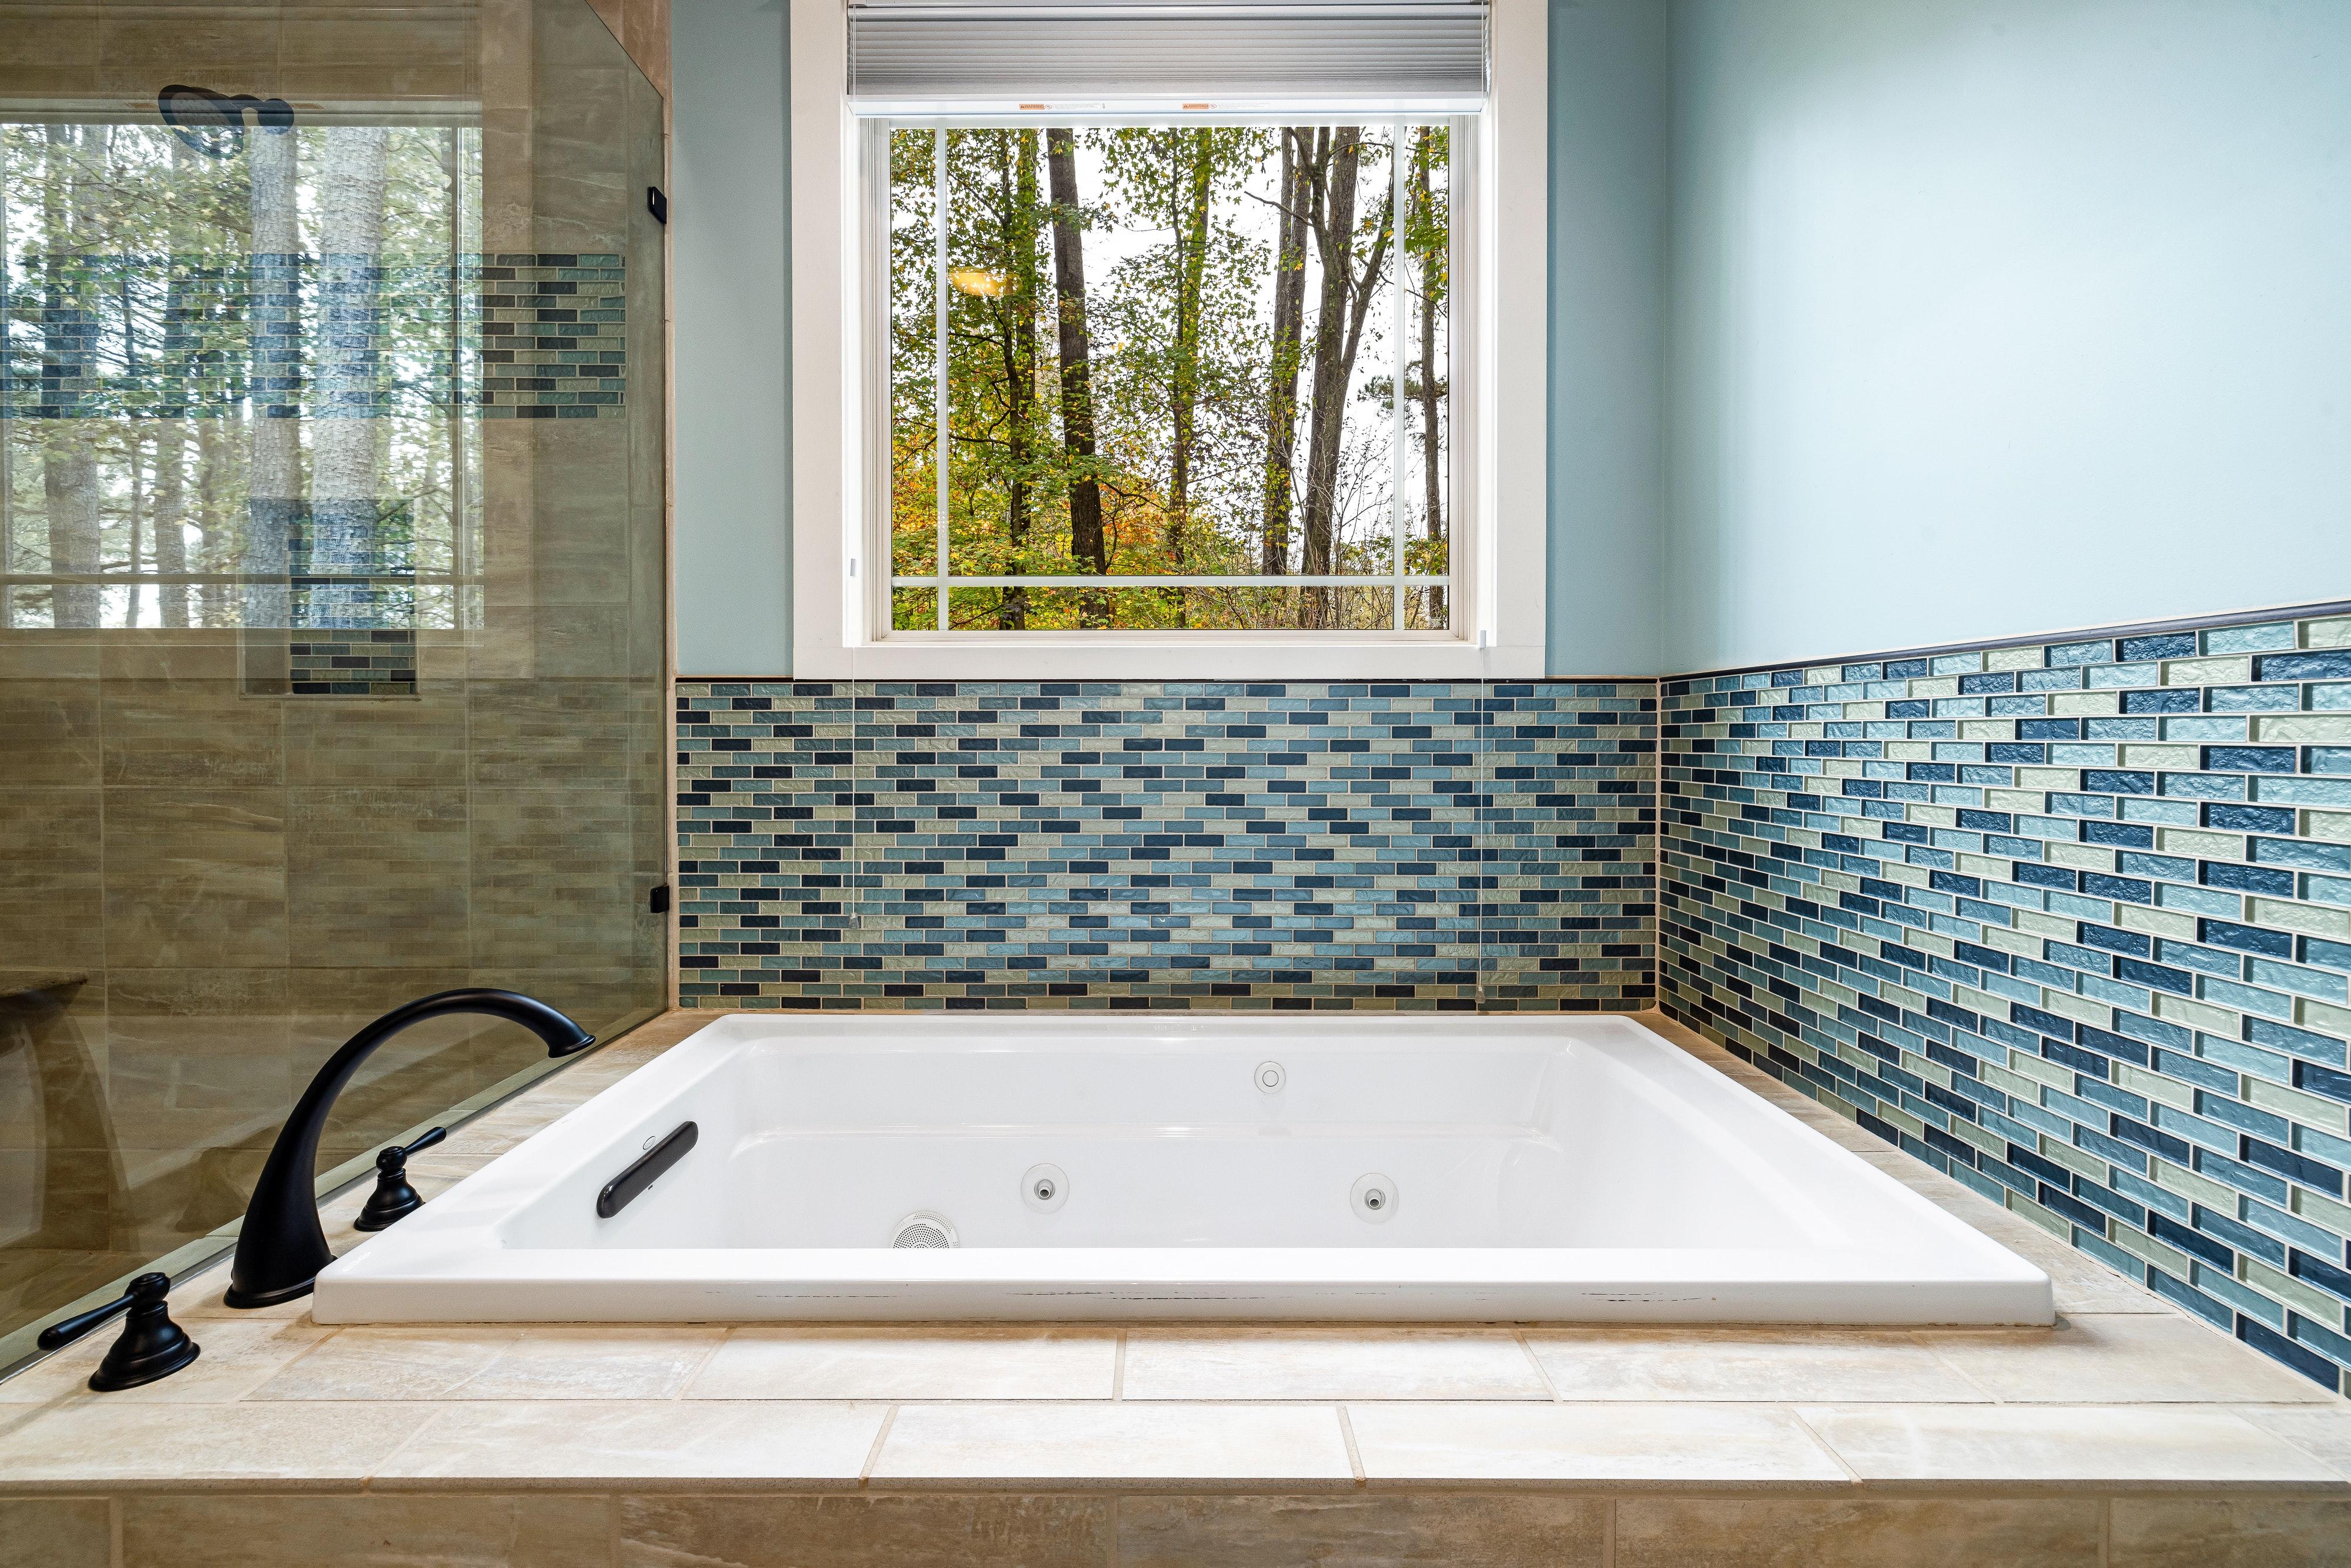  How To Install A Tub Surround Over Ceramic Tile 